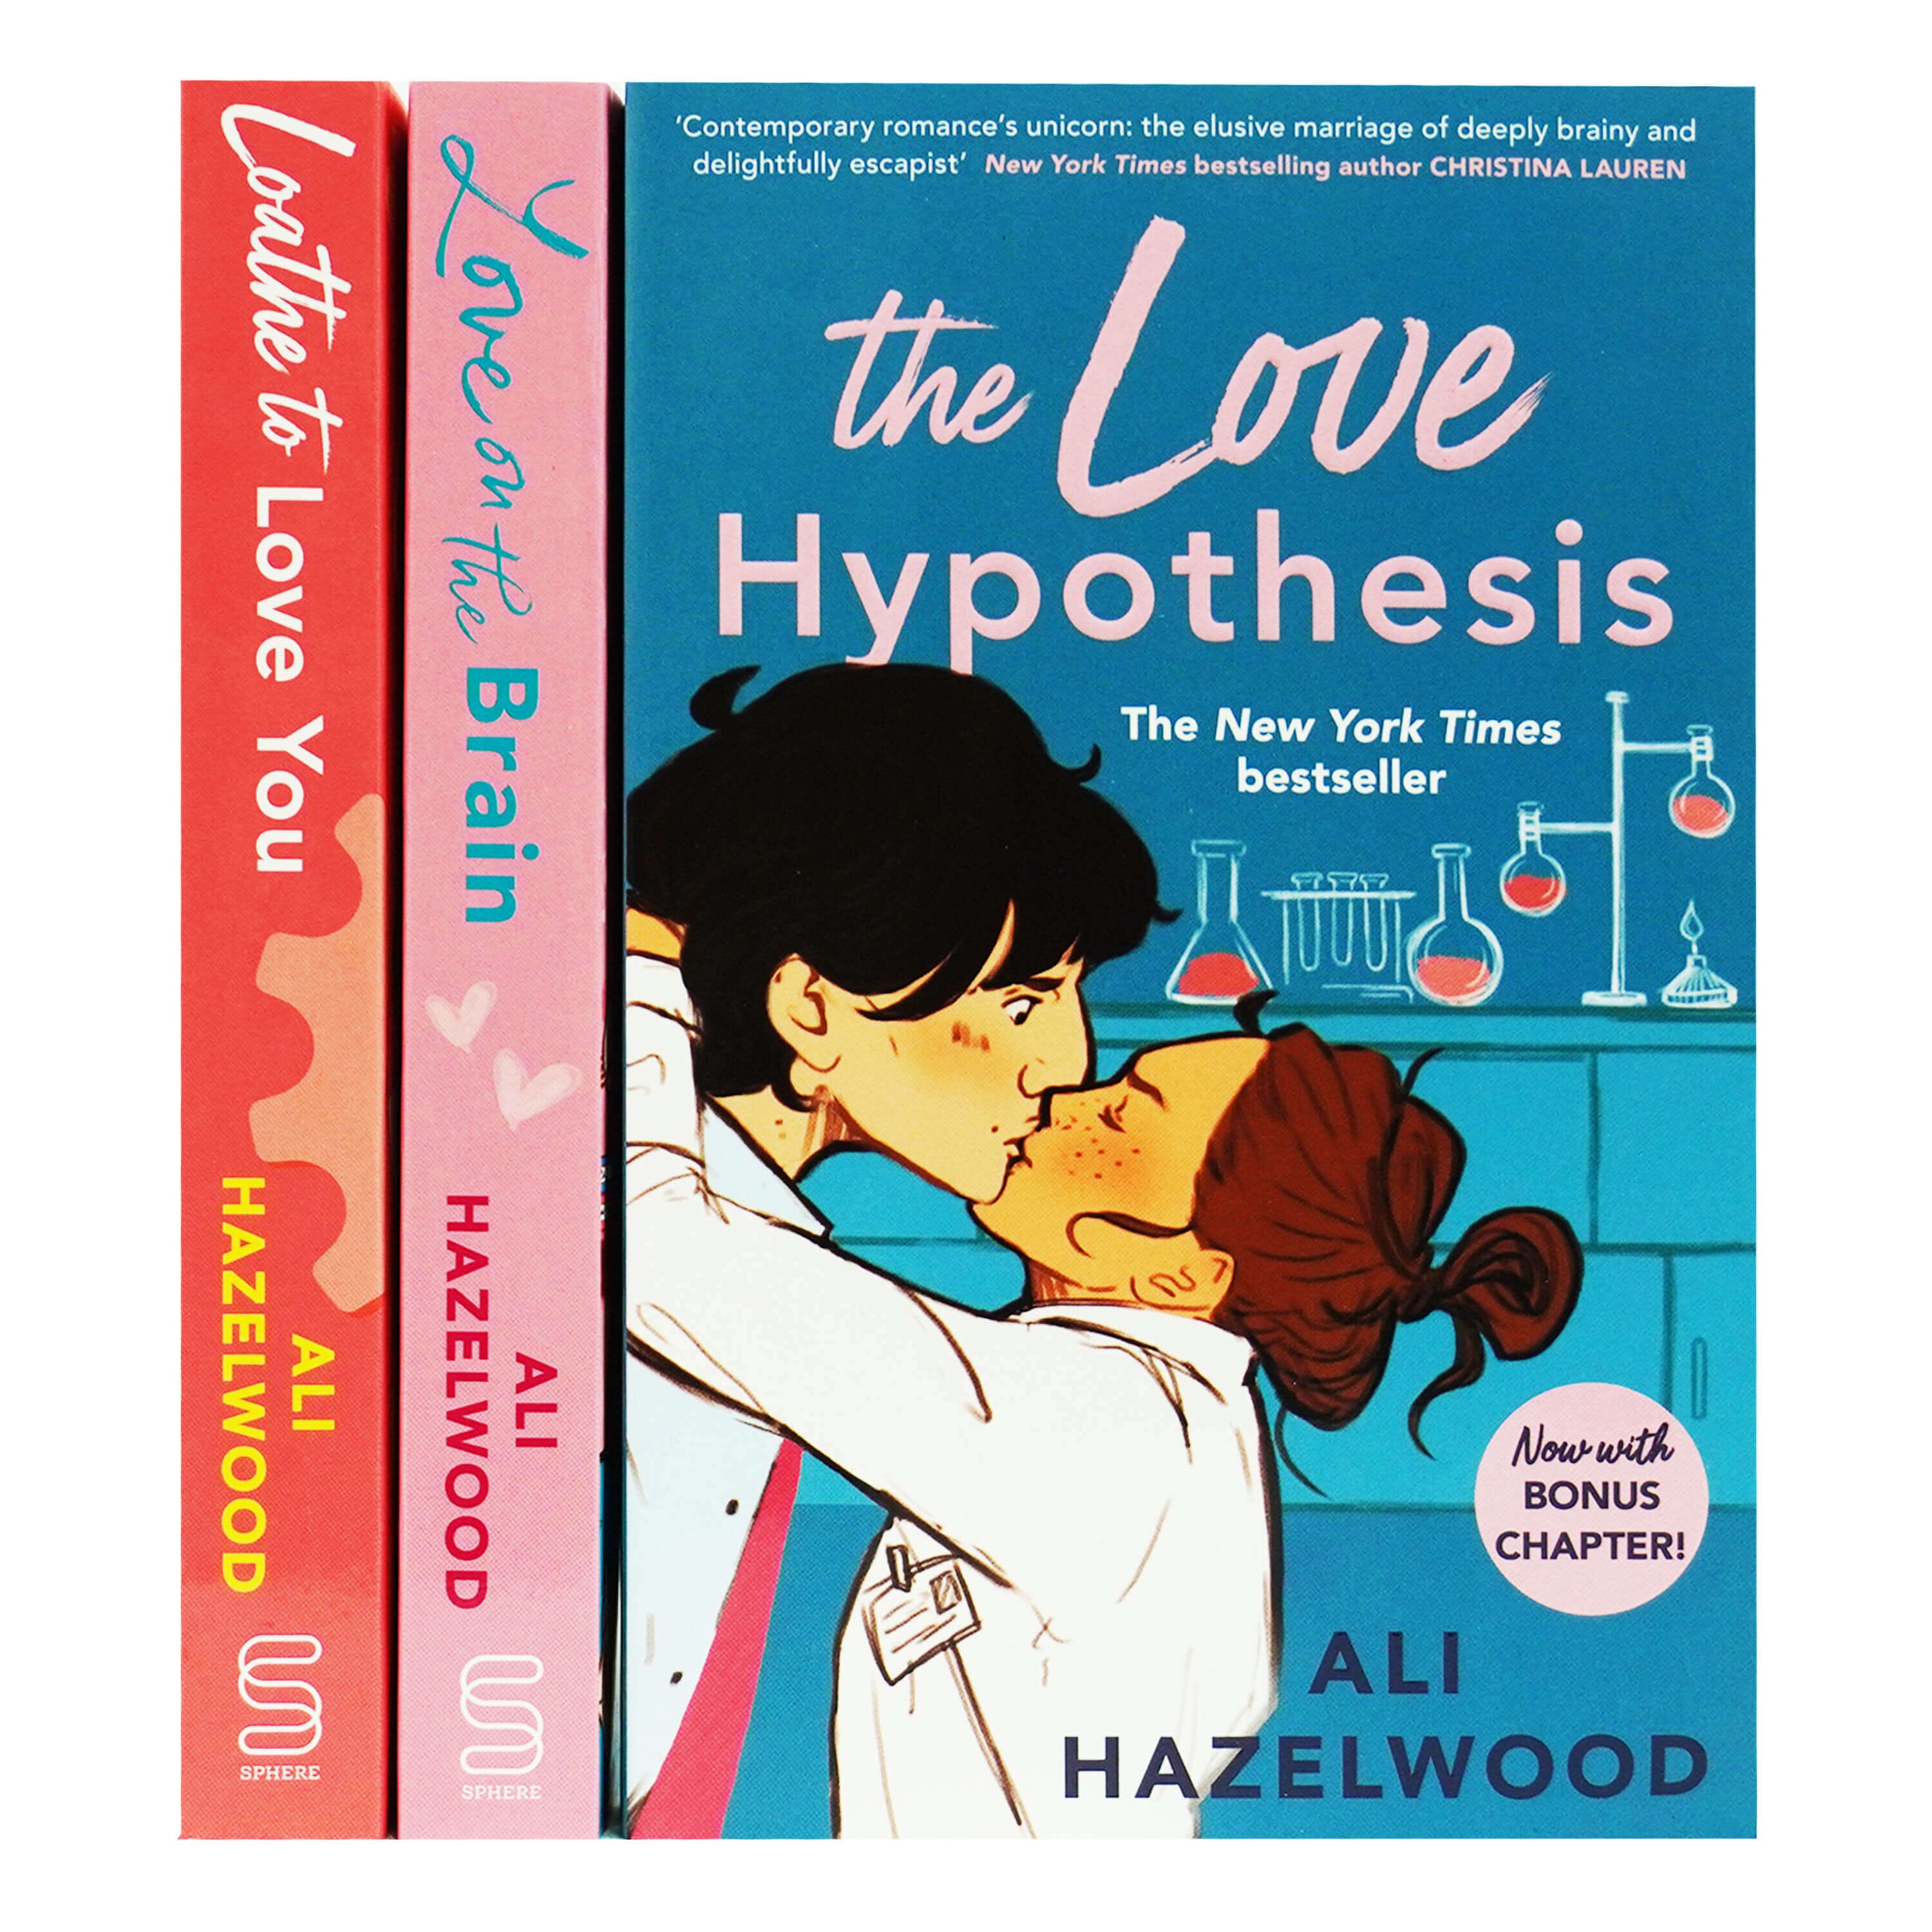 The Love Hypothesis by Ali Hazelwood, Paperback